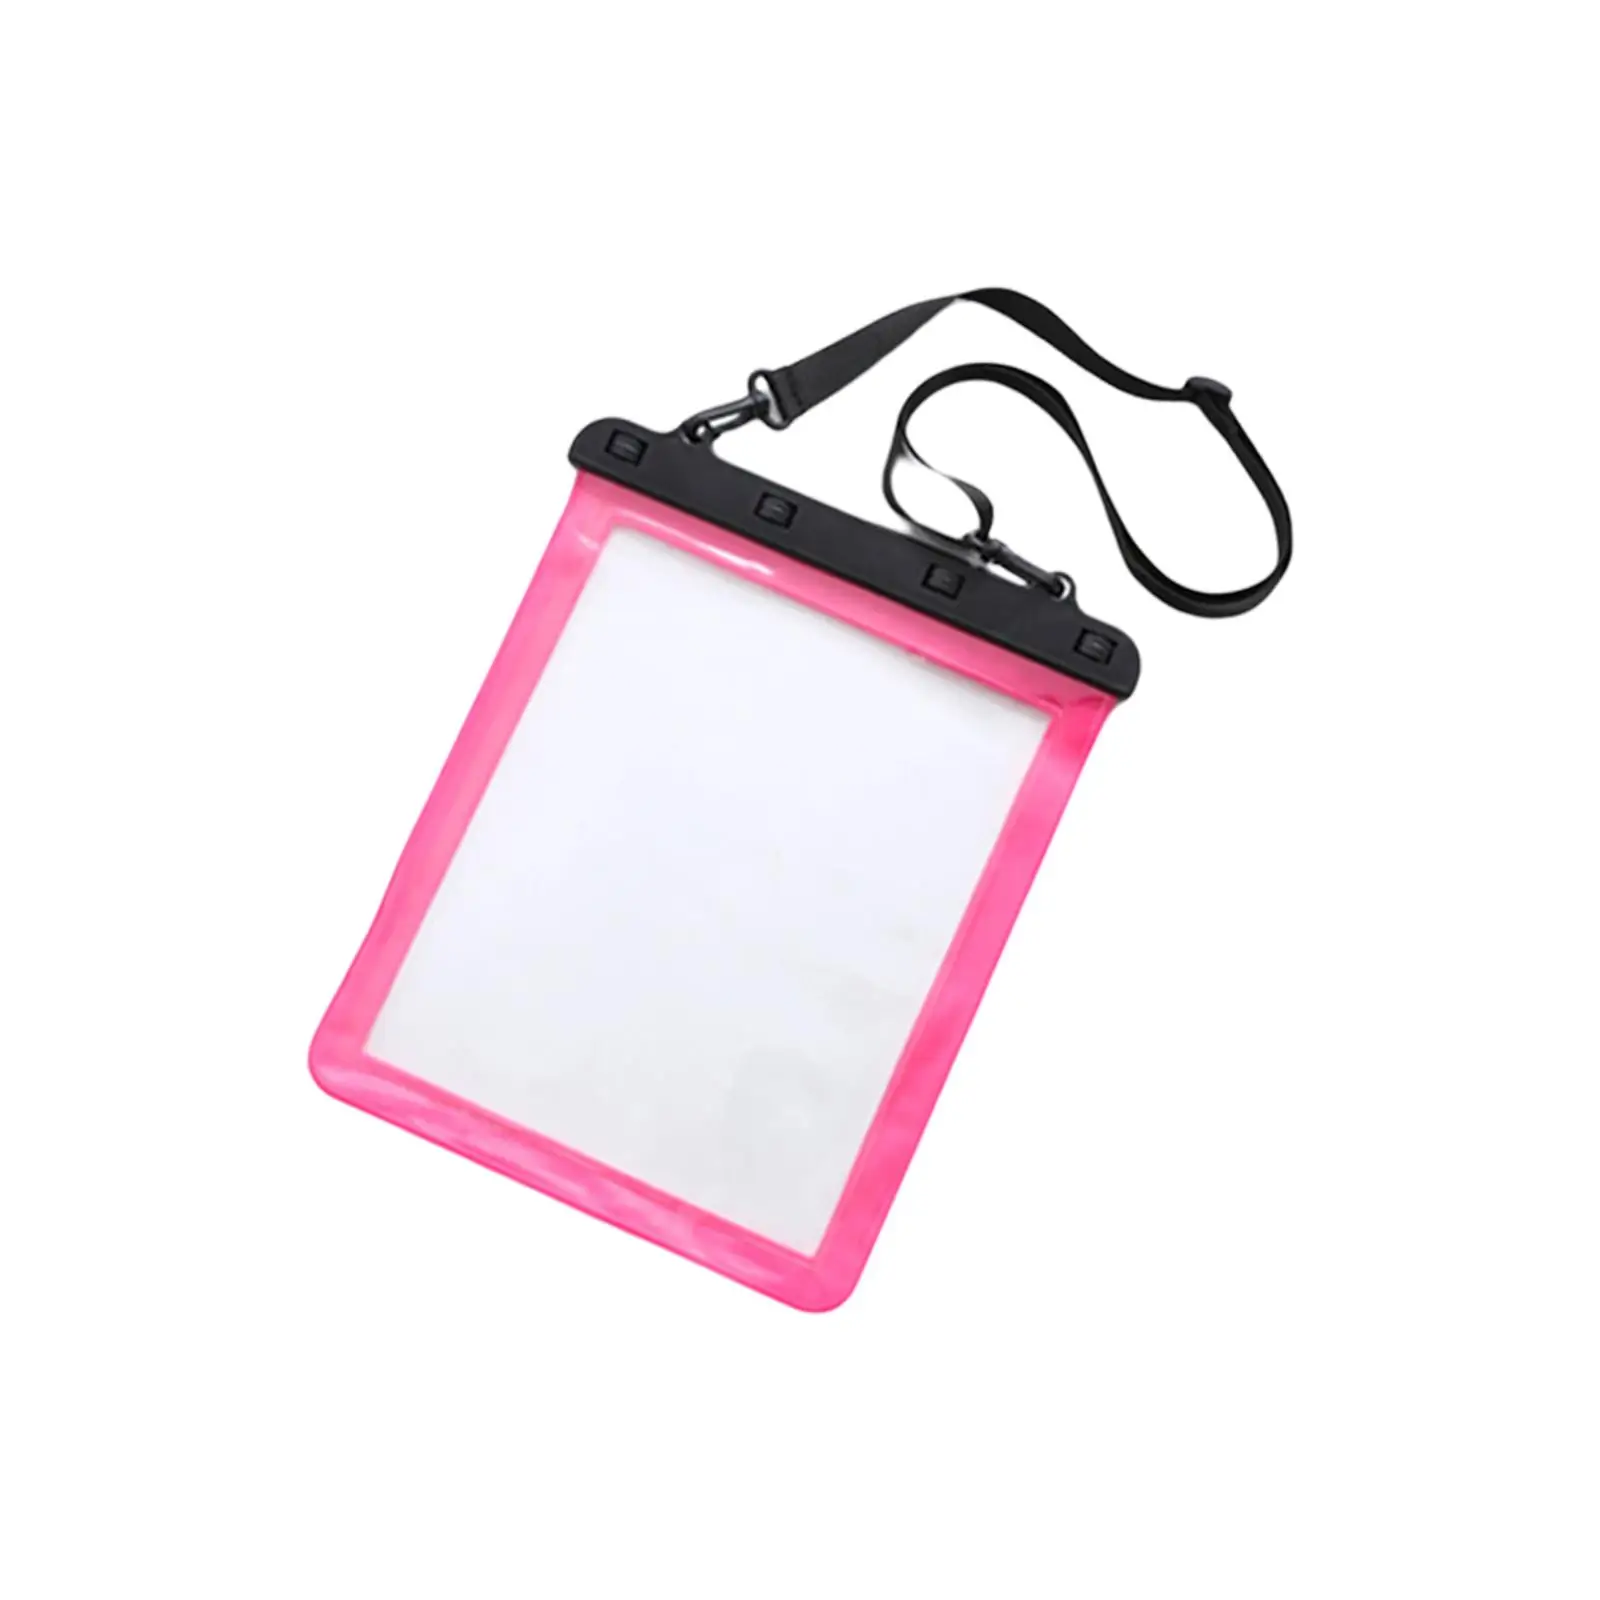 Clear Waterproof Bag Novelty with Detachable Shoulder Strap Sunglasses Storage Pouch for Snorkeling Water Sports Boating